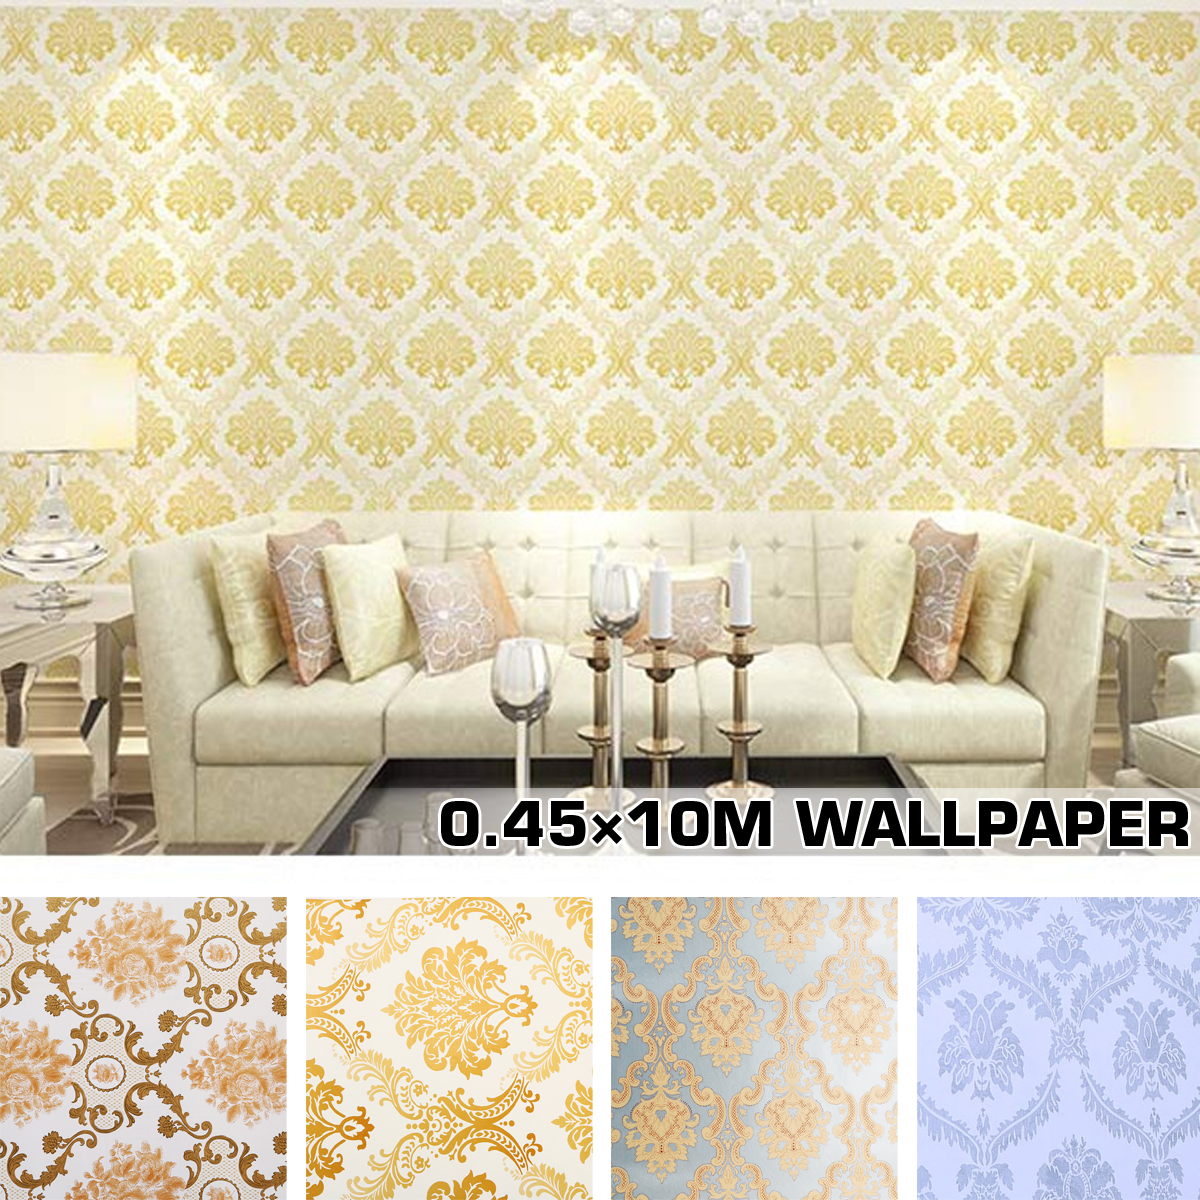 10M-3D-Wallpaper-Self-adhesive-Roll--Stickers-Paper-Decoration-Waterproof-1802614-1